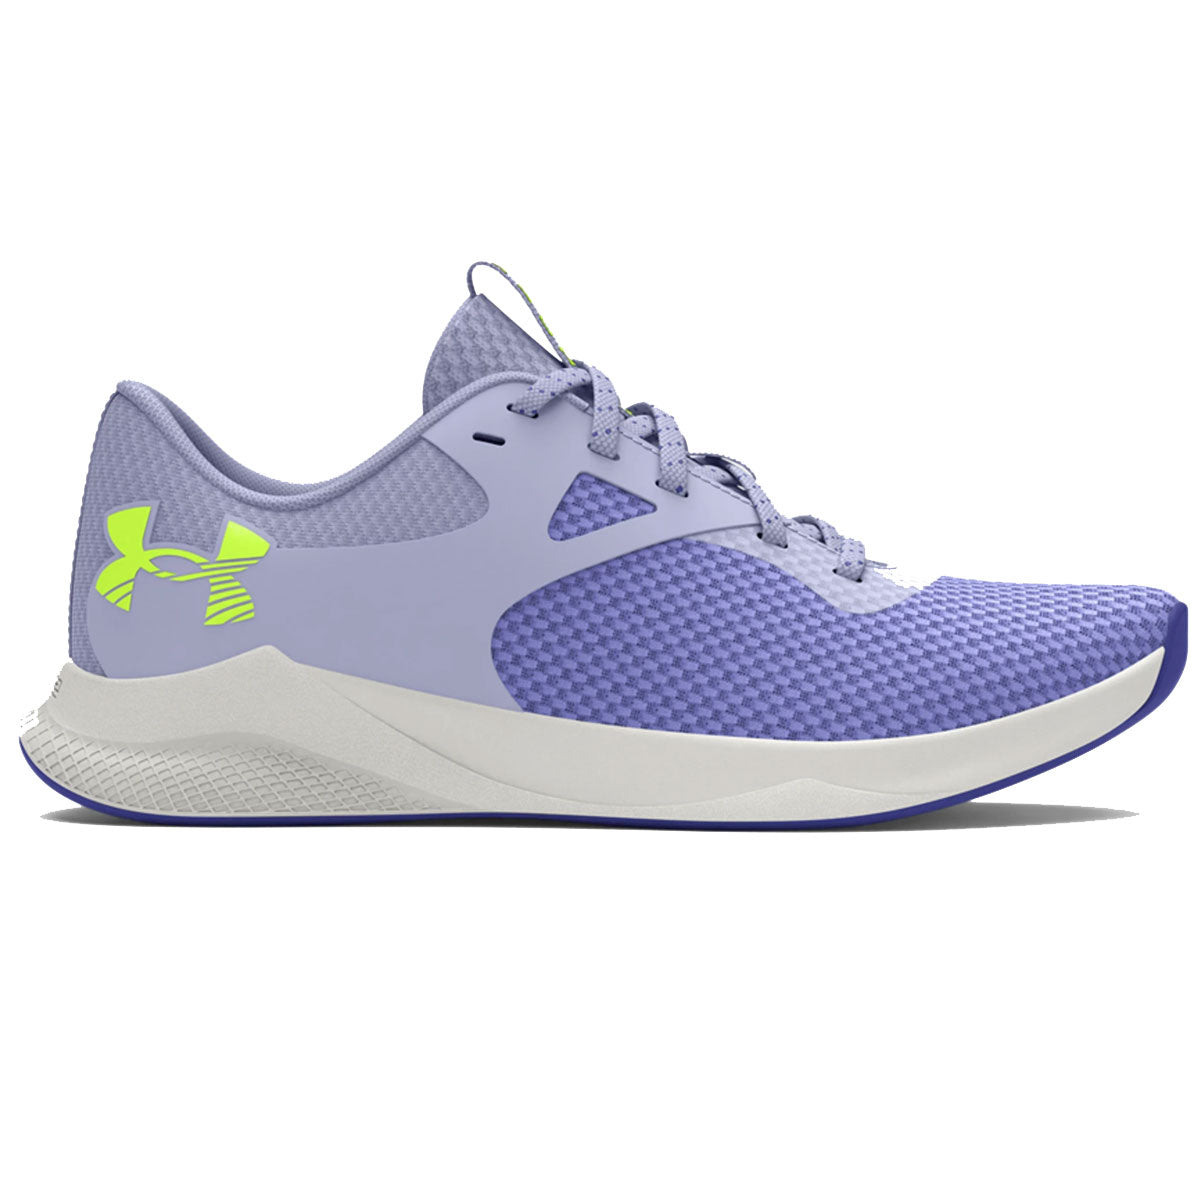 Under Armour Charged Aurora 2 Training Shoes - Womens - Celeste/White Clay/High Vis Yellow